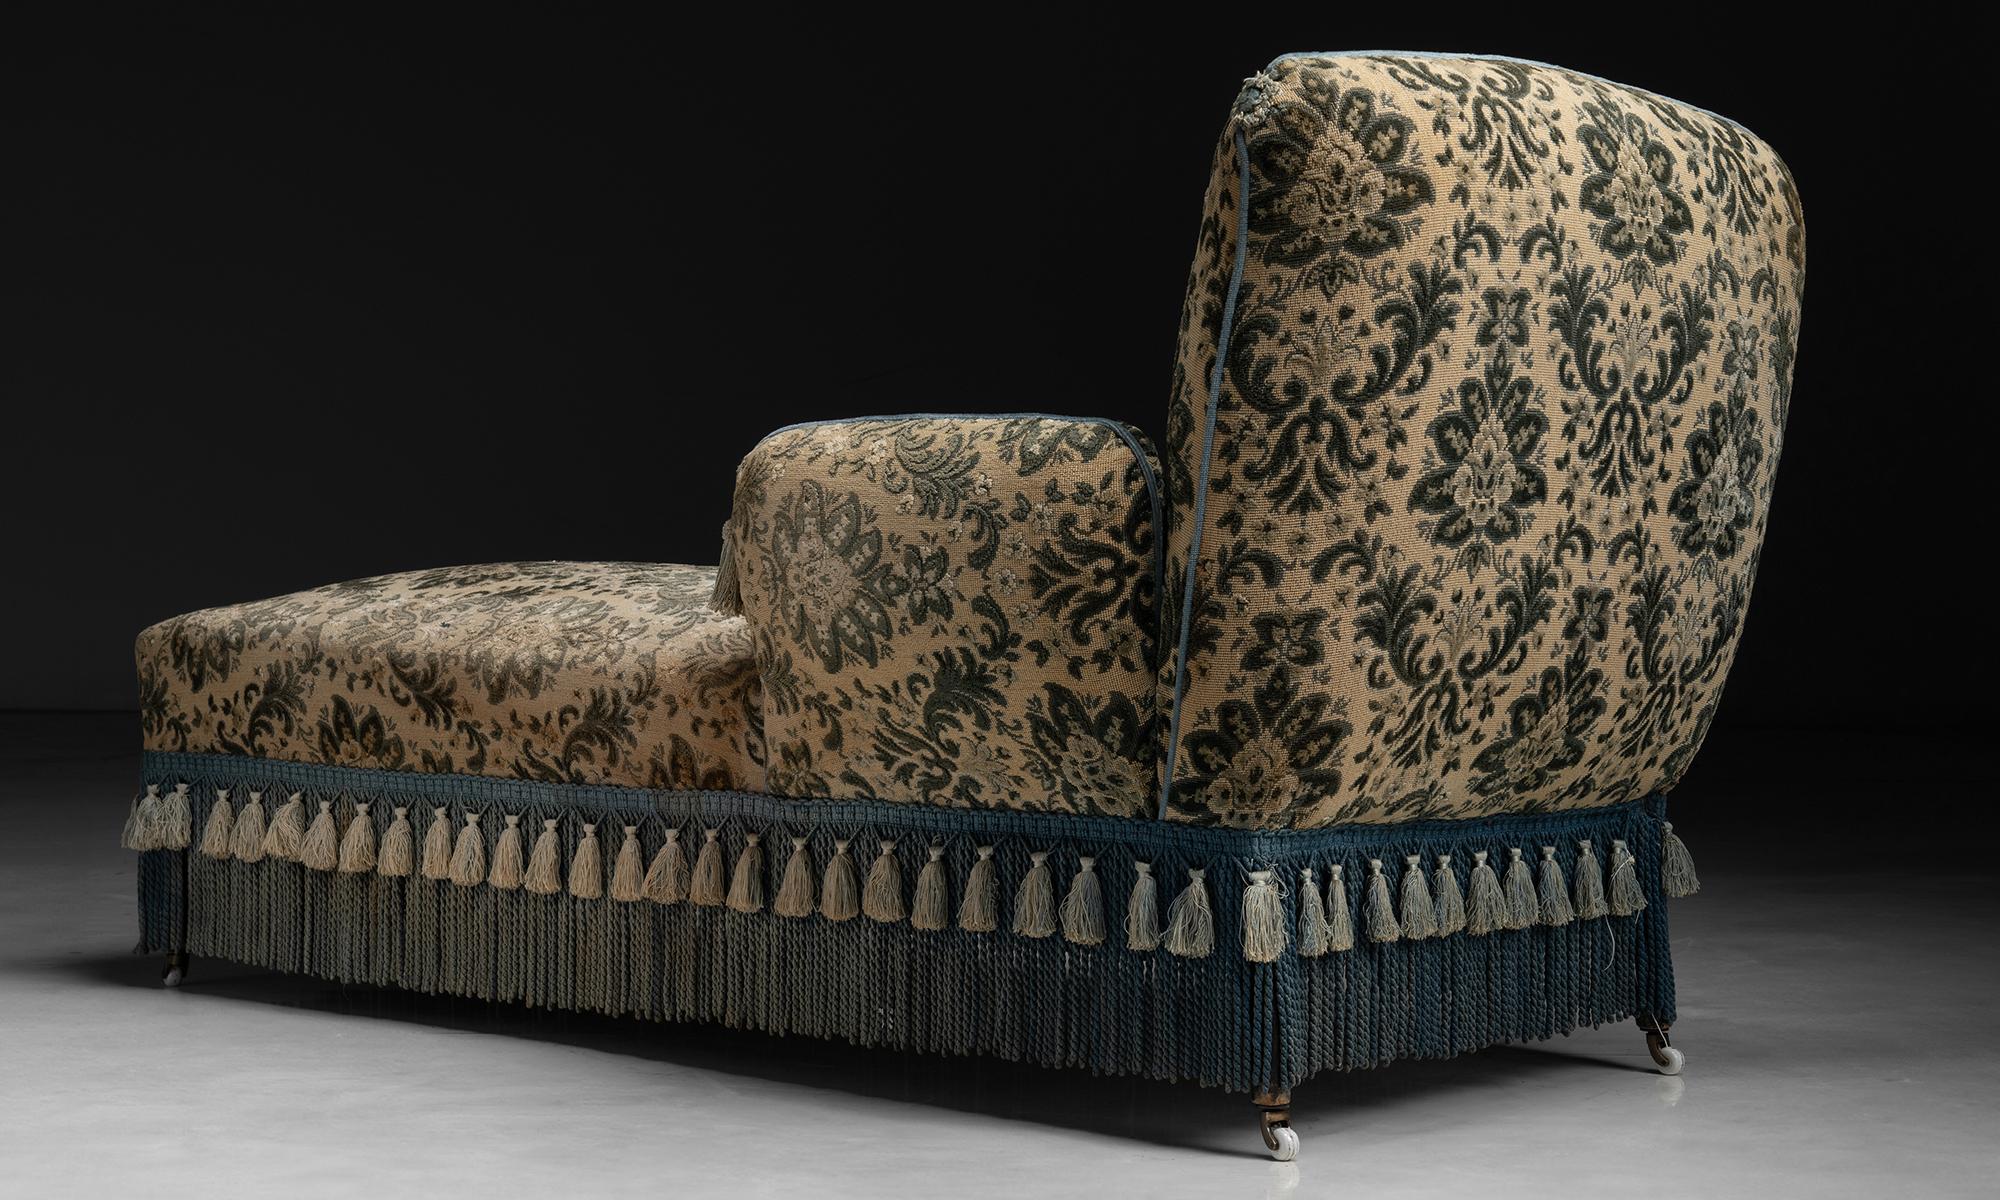 Chaise Lounge in Jacquard Fabric, France Circa 1910 For Sale 2